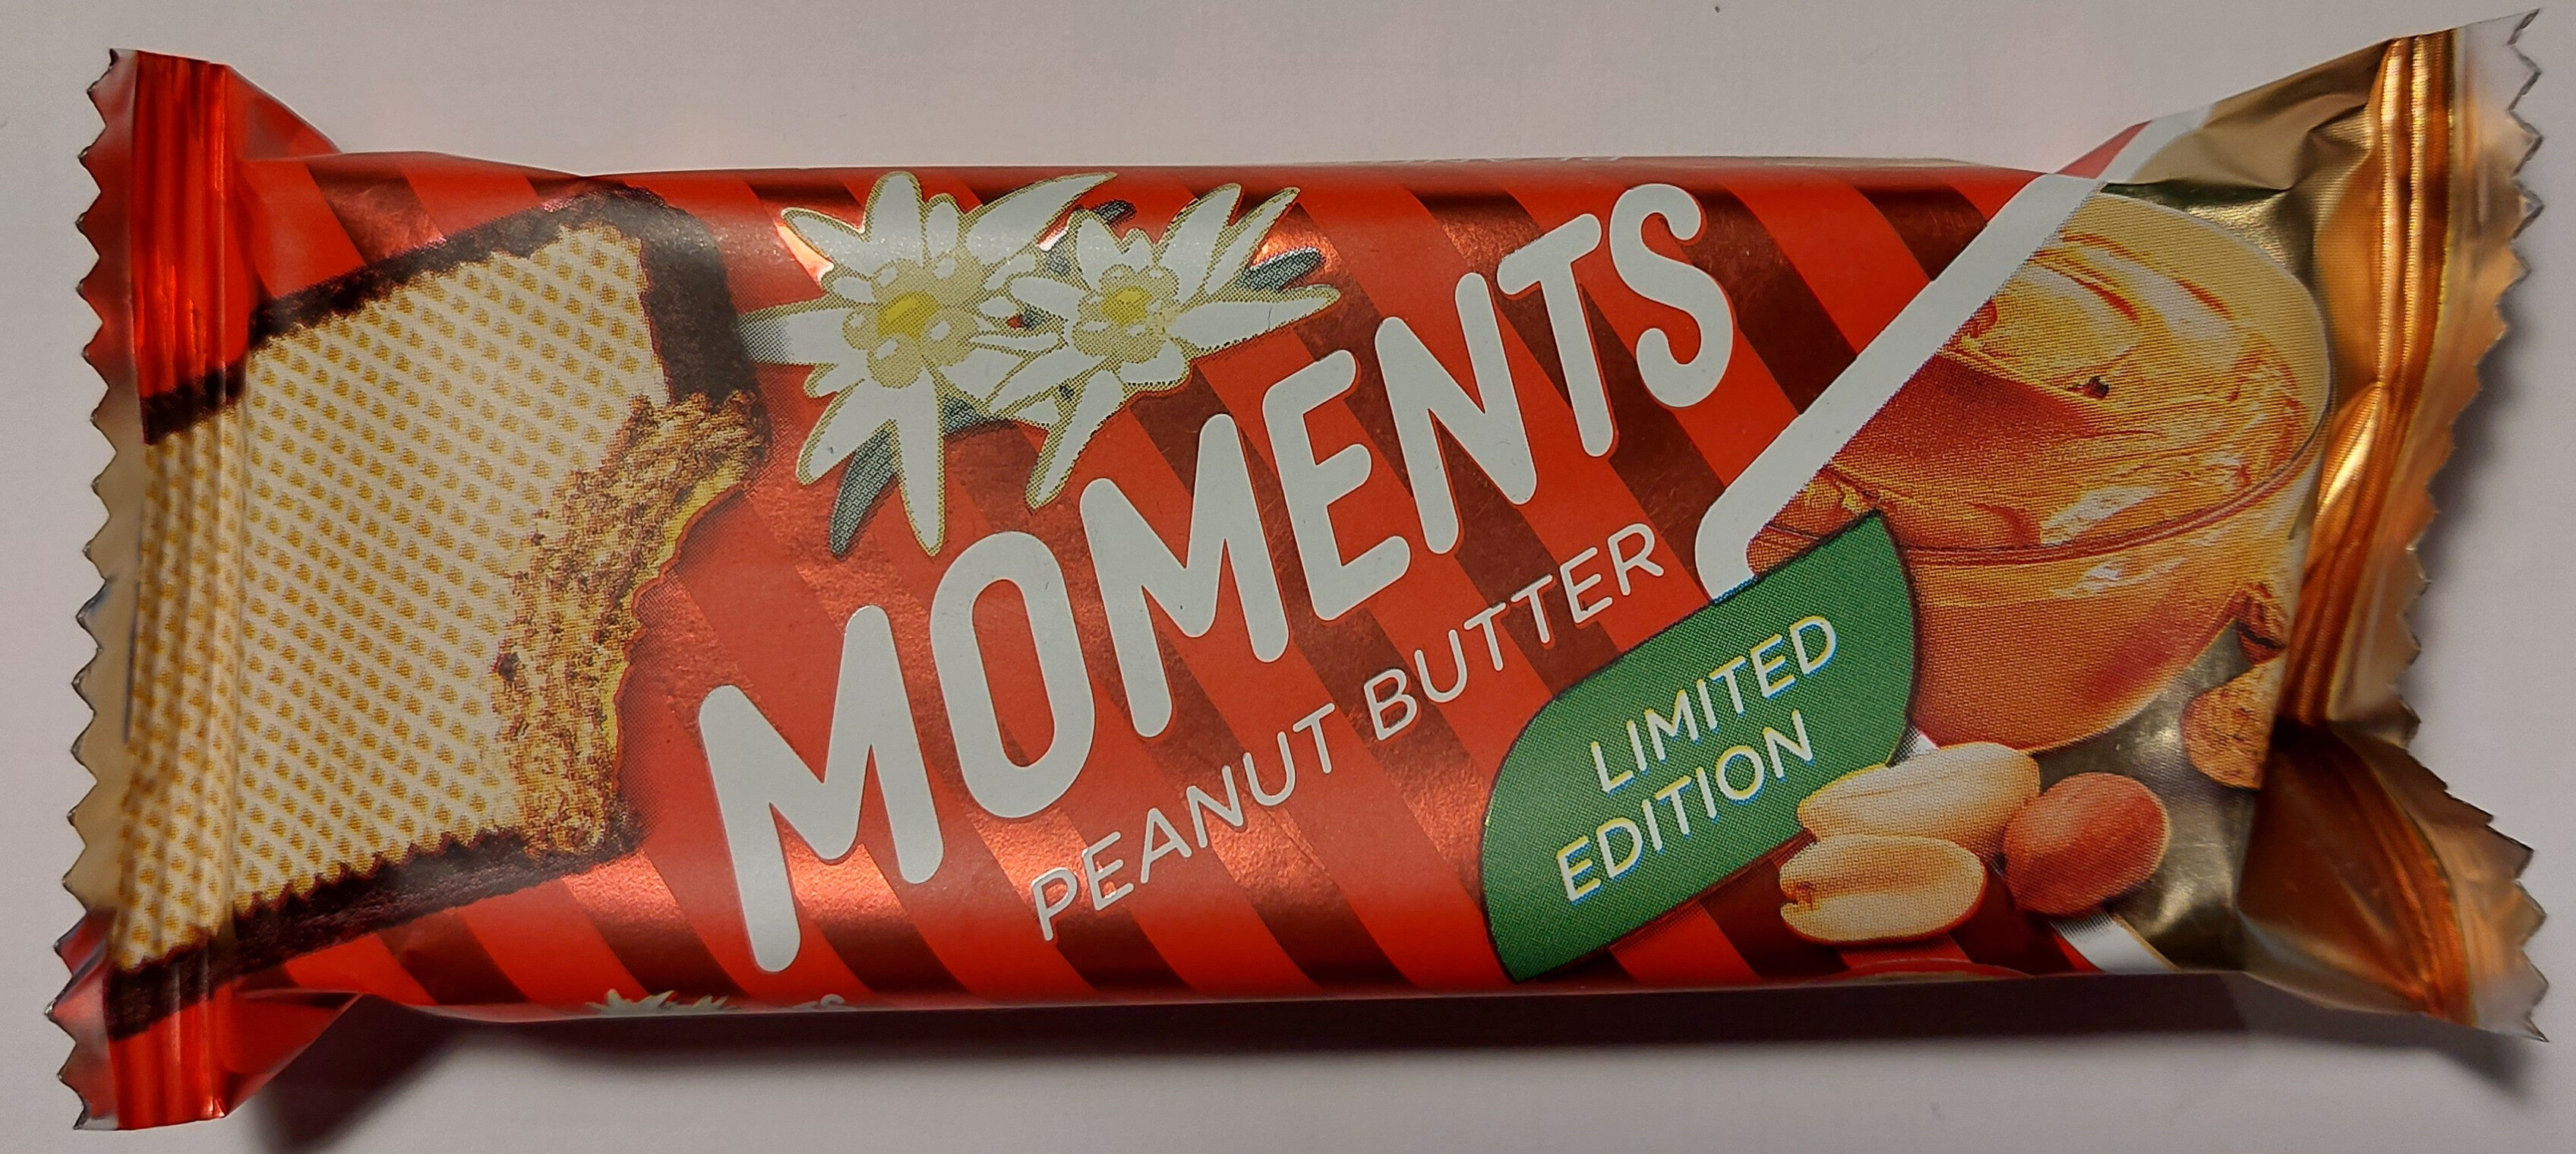 MOMENTS PEANUT BUTTER - Product - hu